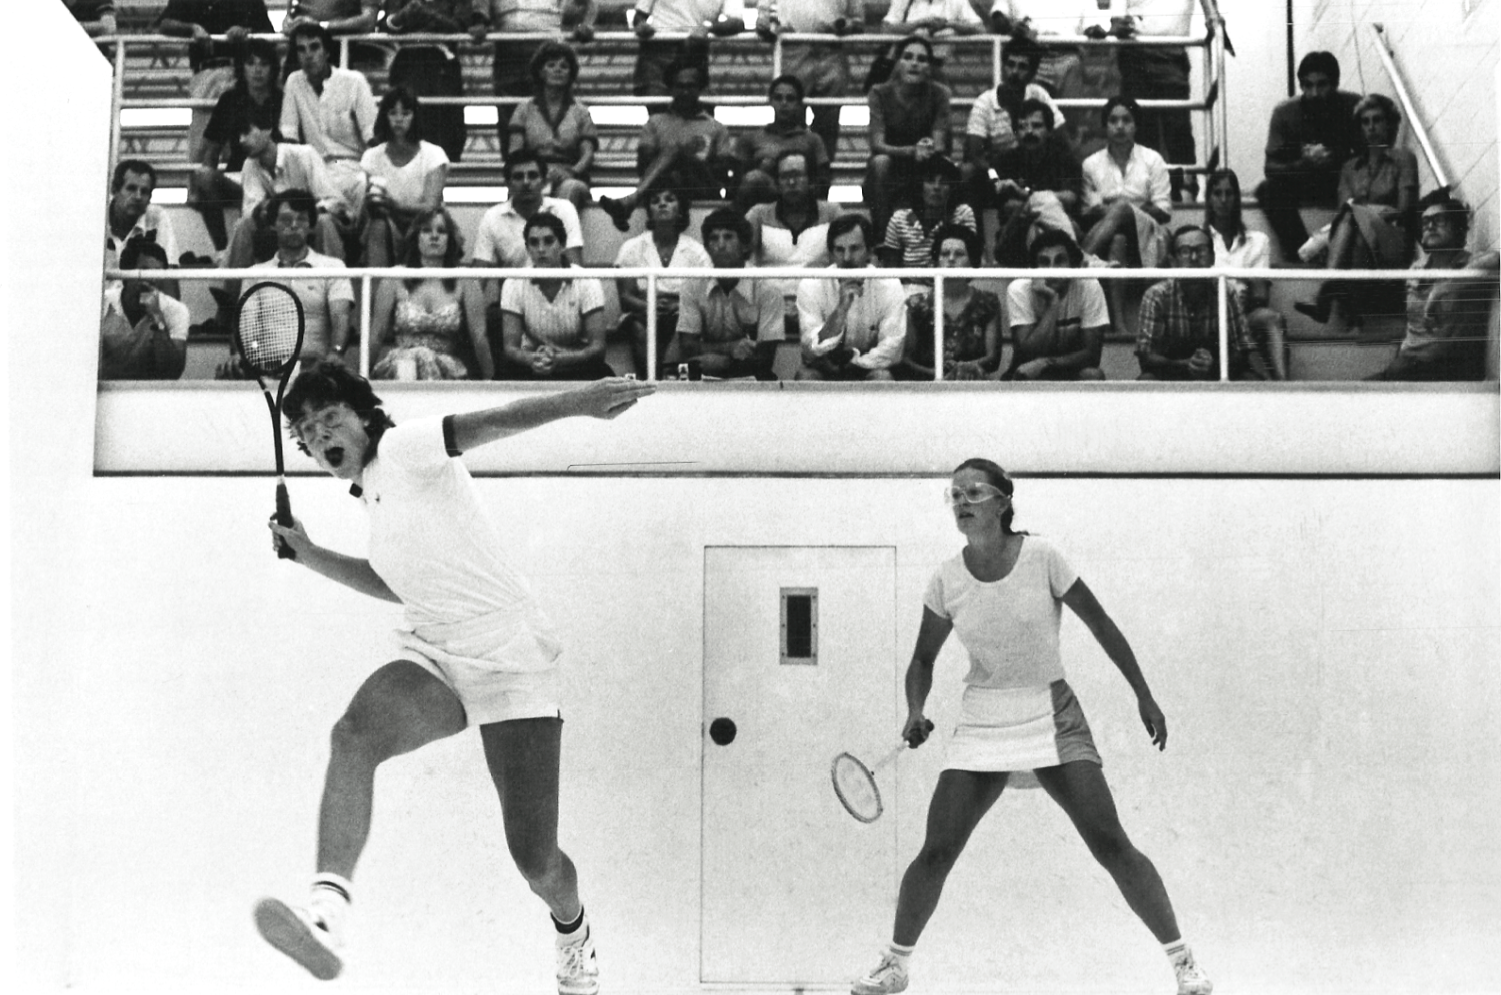 Alicia McConnell (L), with her trademark enthusiasm, attacked the ball in the finals of the Women’s Open draw at the first softball nationals in 1983. She beat Nina Porter 1, 2, 1, despite Porter making just a couple of unforced errors. McConnell, who went on to win the National Intercollegiates and National Open titles later that season, was unstoppable in Baltimore and outscored here opponents 81-14 over the weekend.